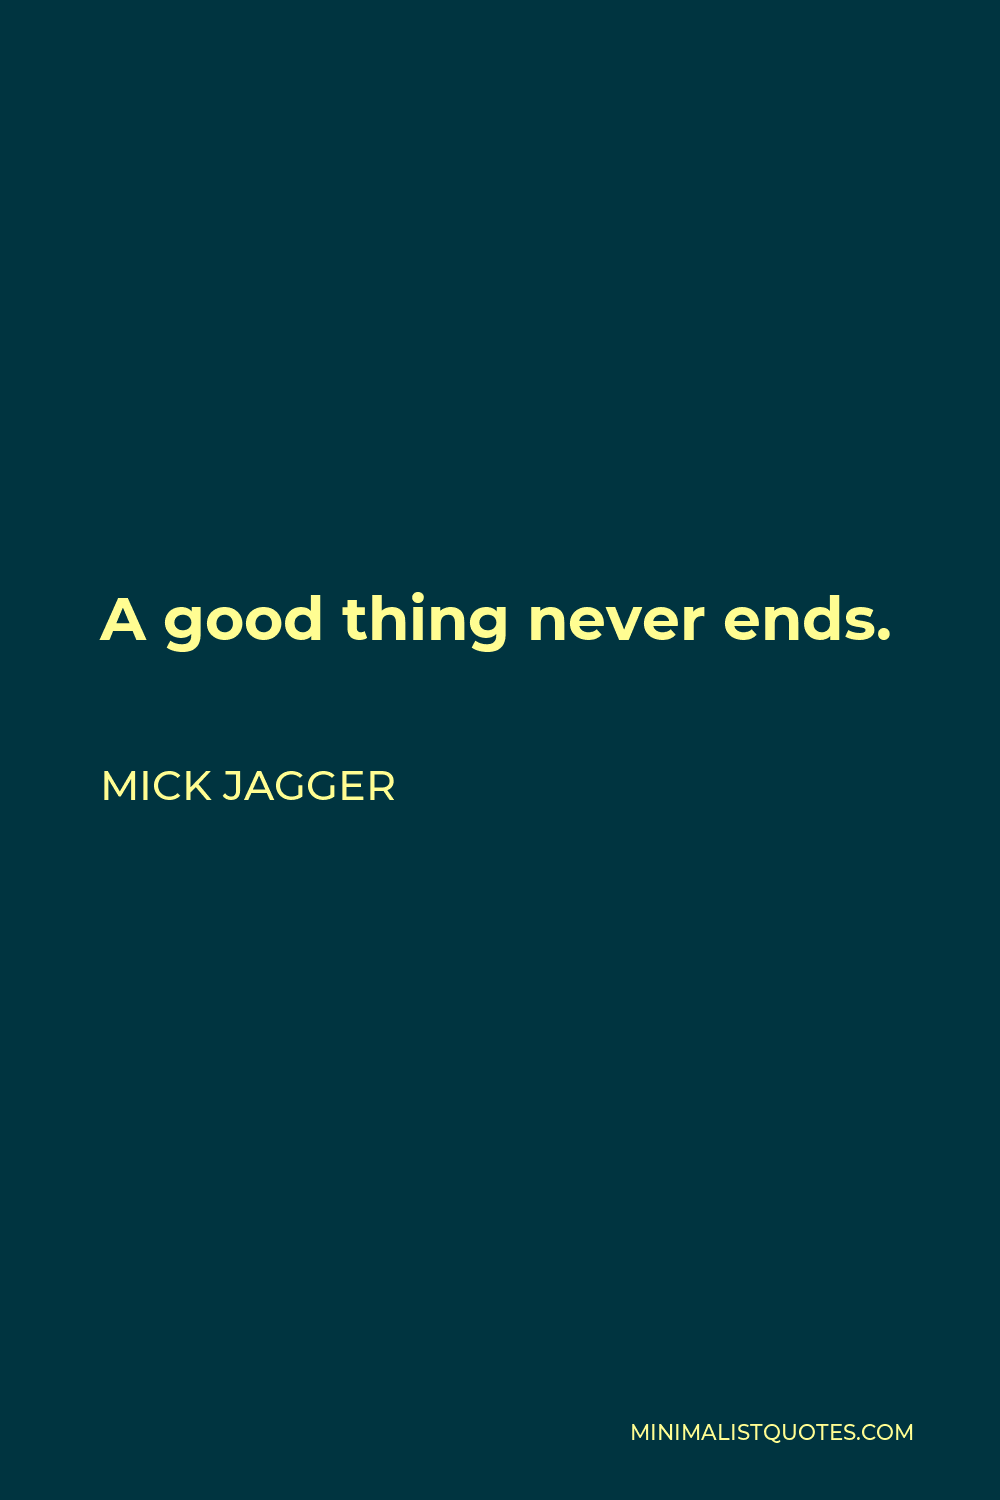 Mick Jagger Quote - A good thing never ends.